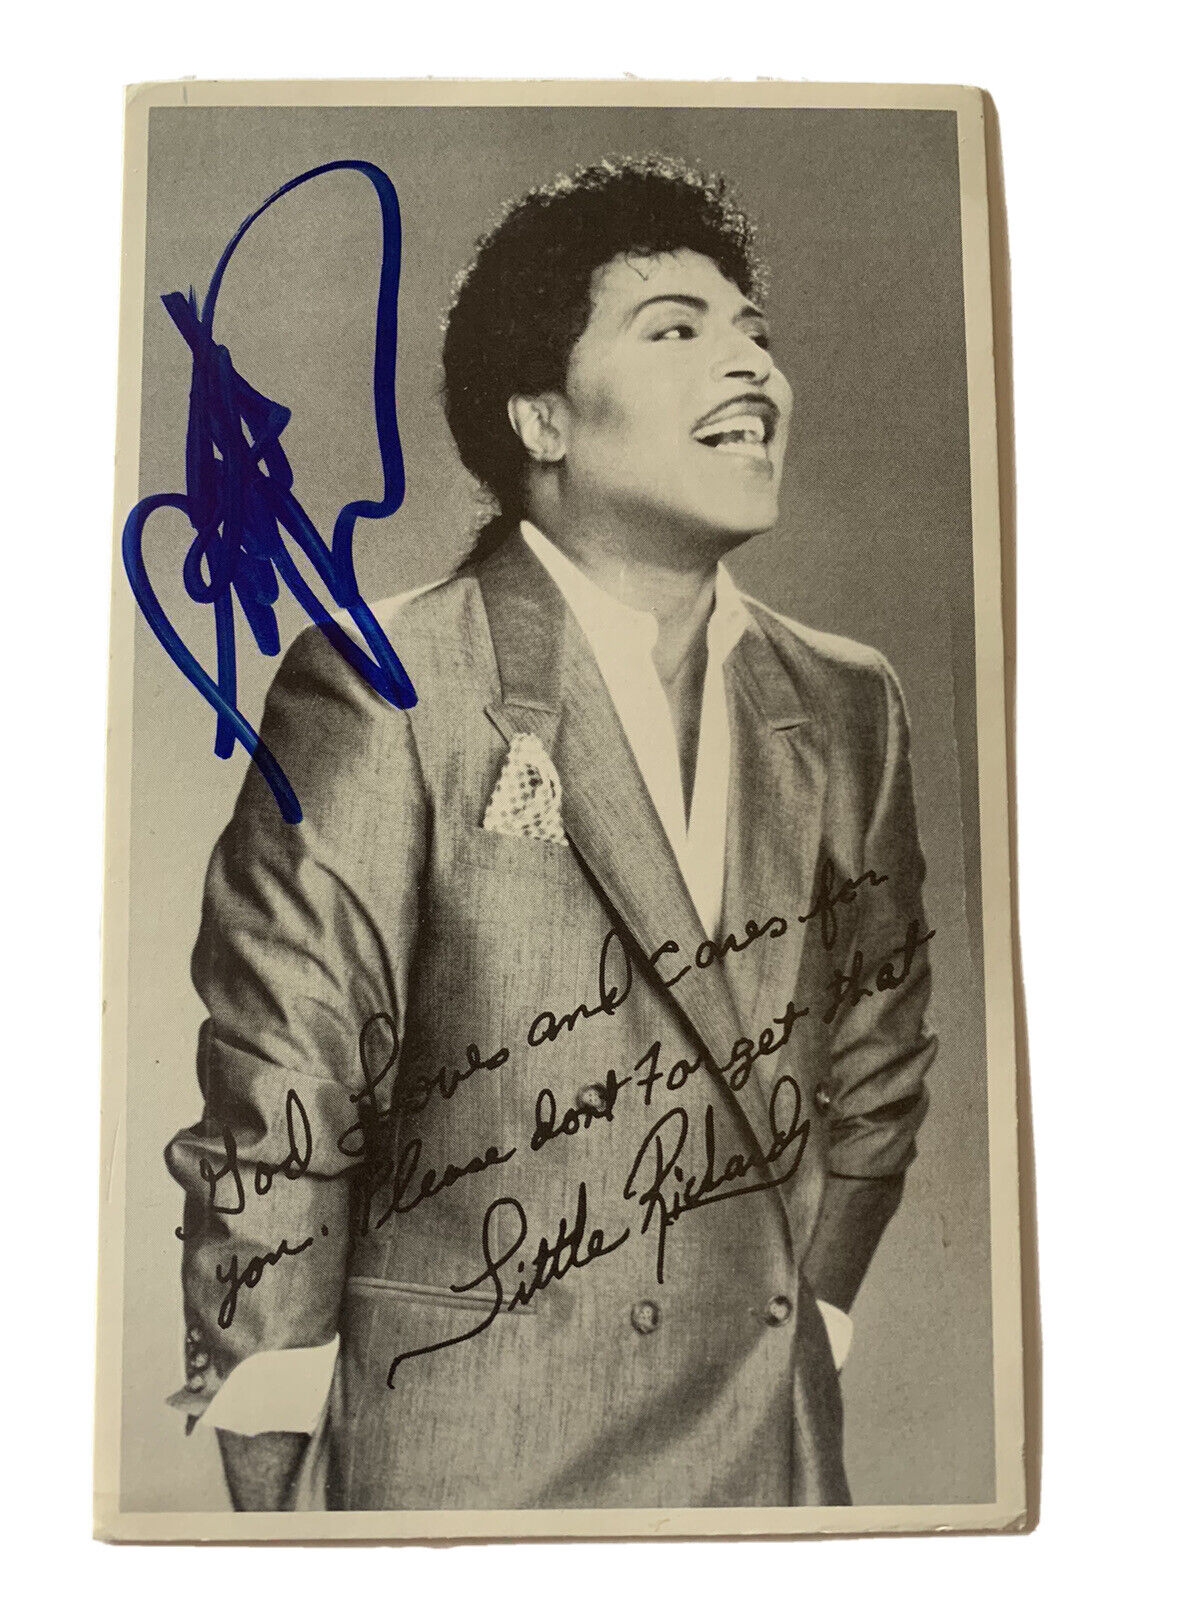 Little Richard Signed Autographed 4x6.5 Postcard Photo Poster painting Beckett Certified